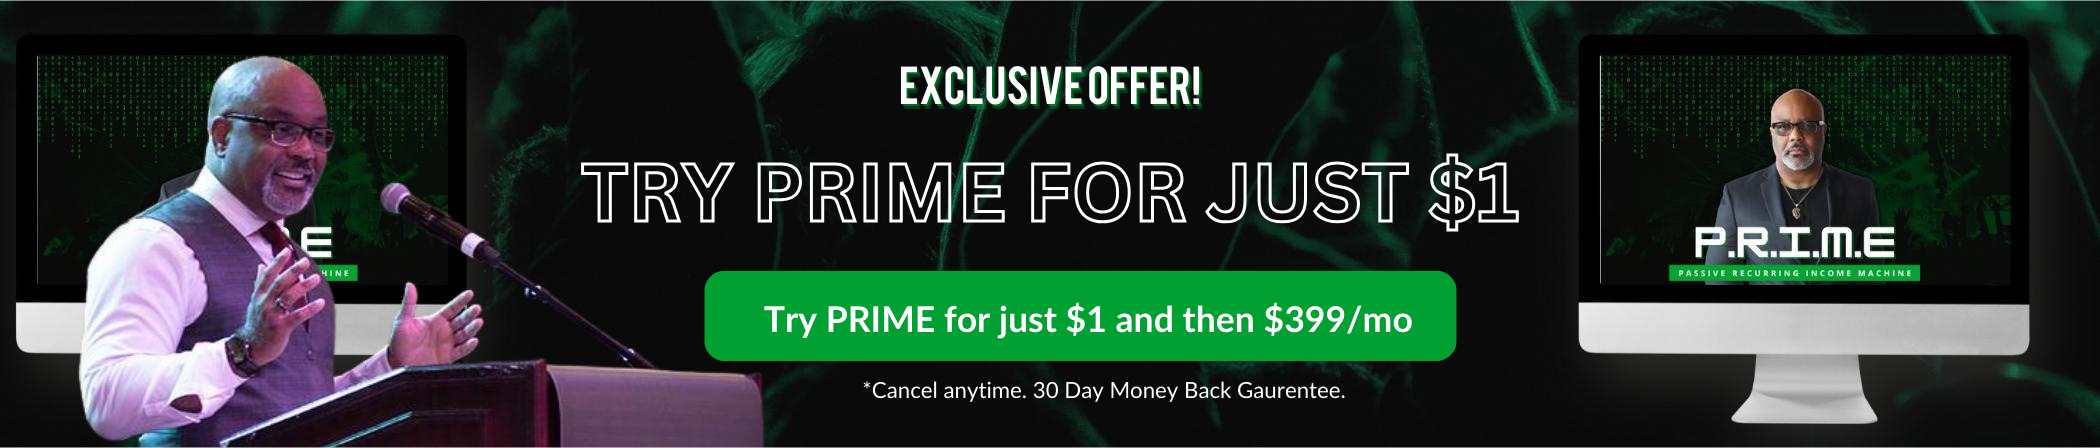 Try PRIME for Just $1. One dollar for the first month and then $399 per month